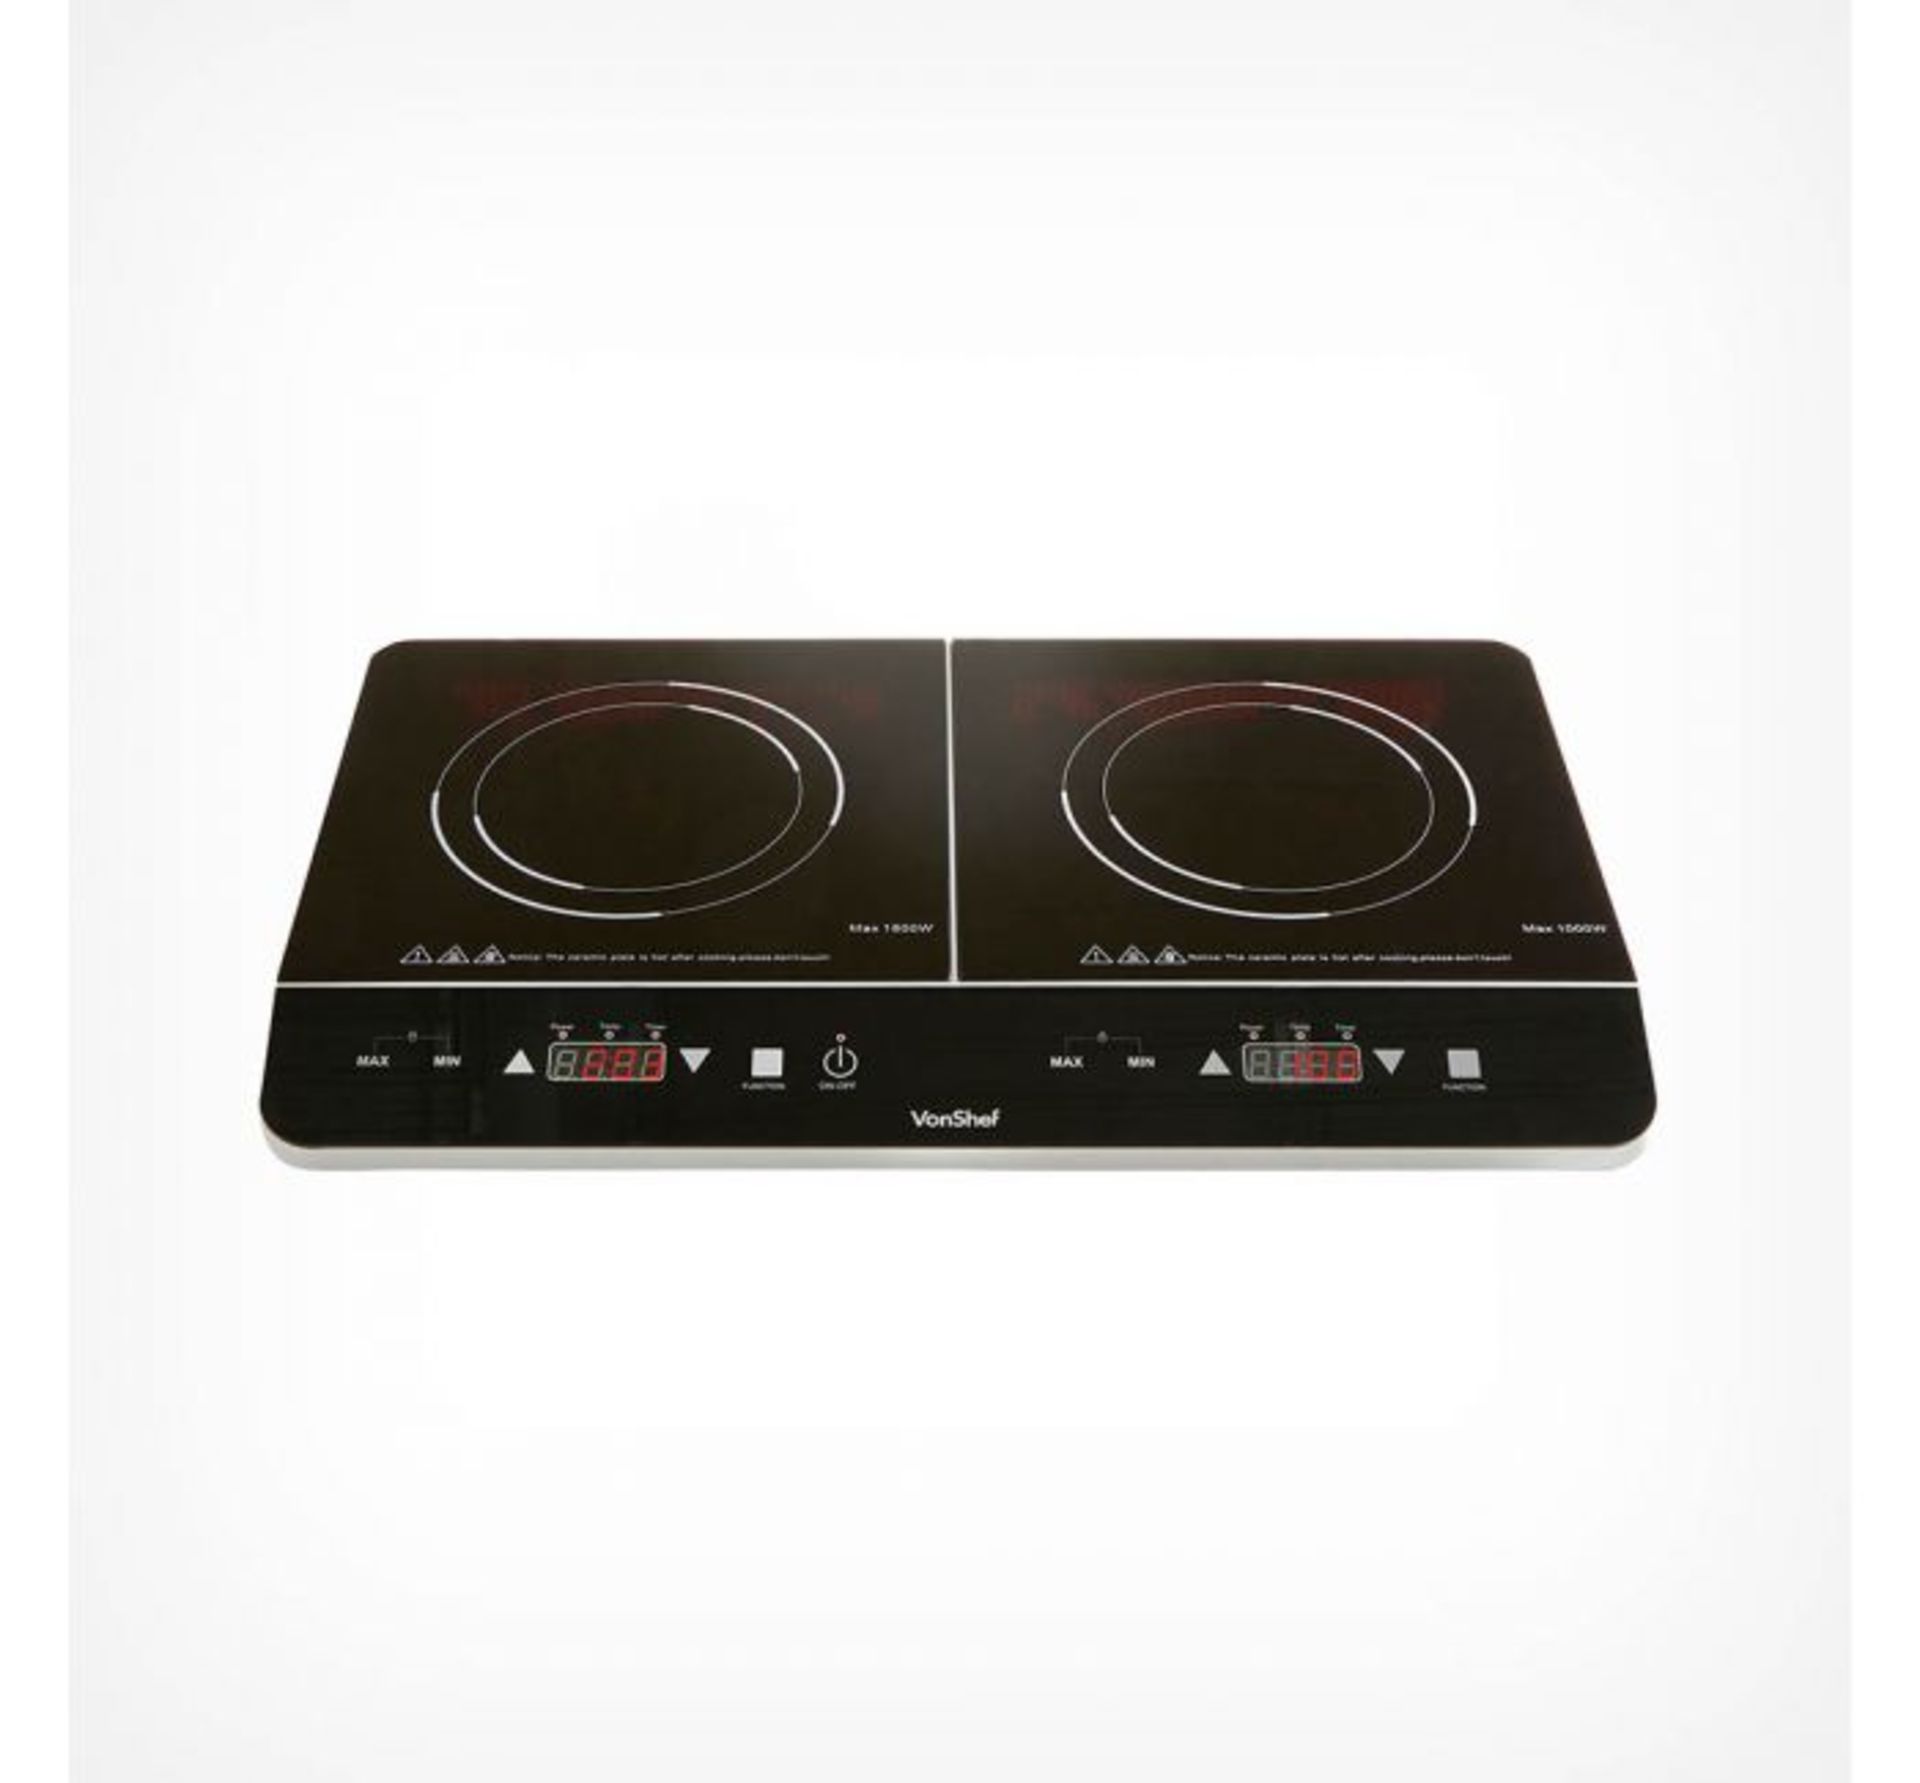 (TD22) Twin Digital Induction Hob Boasting a temperature range of 60C - 240C so can be used to... - Image 2 of 3